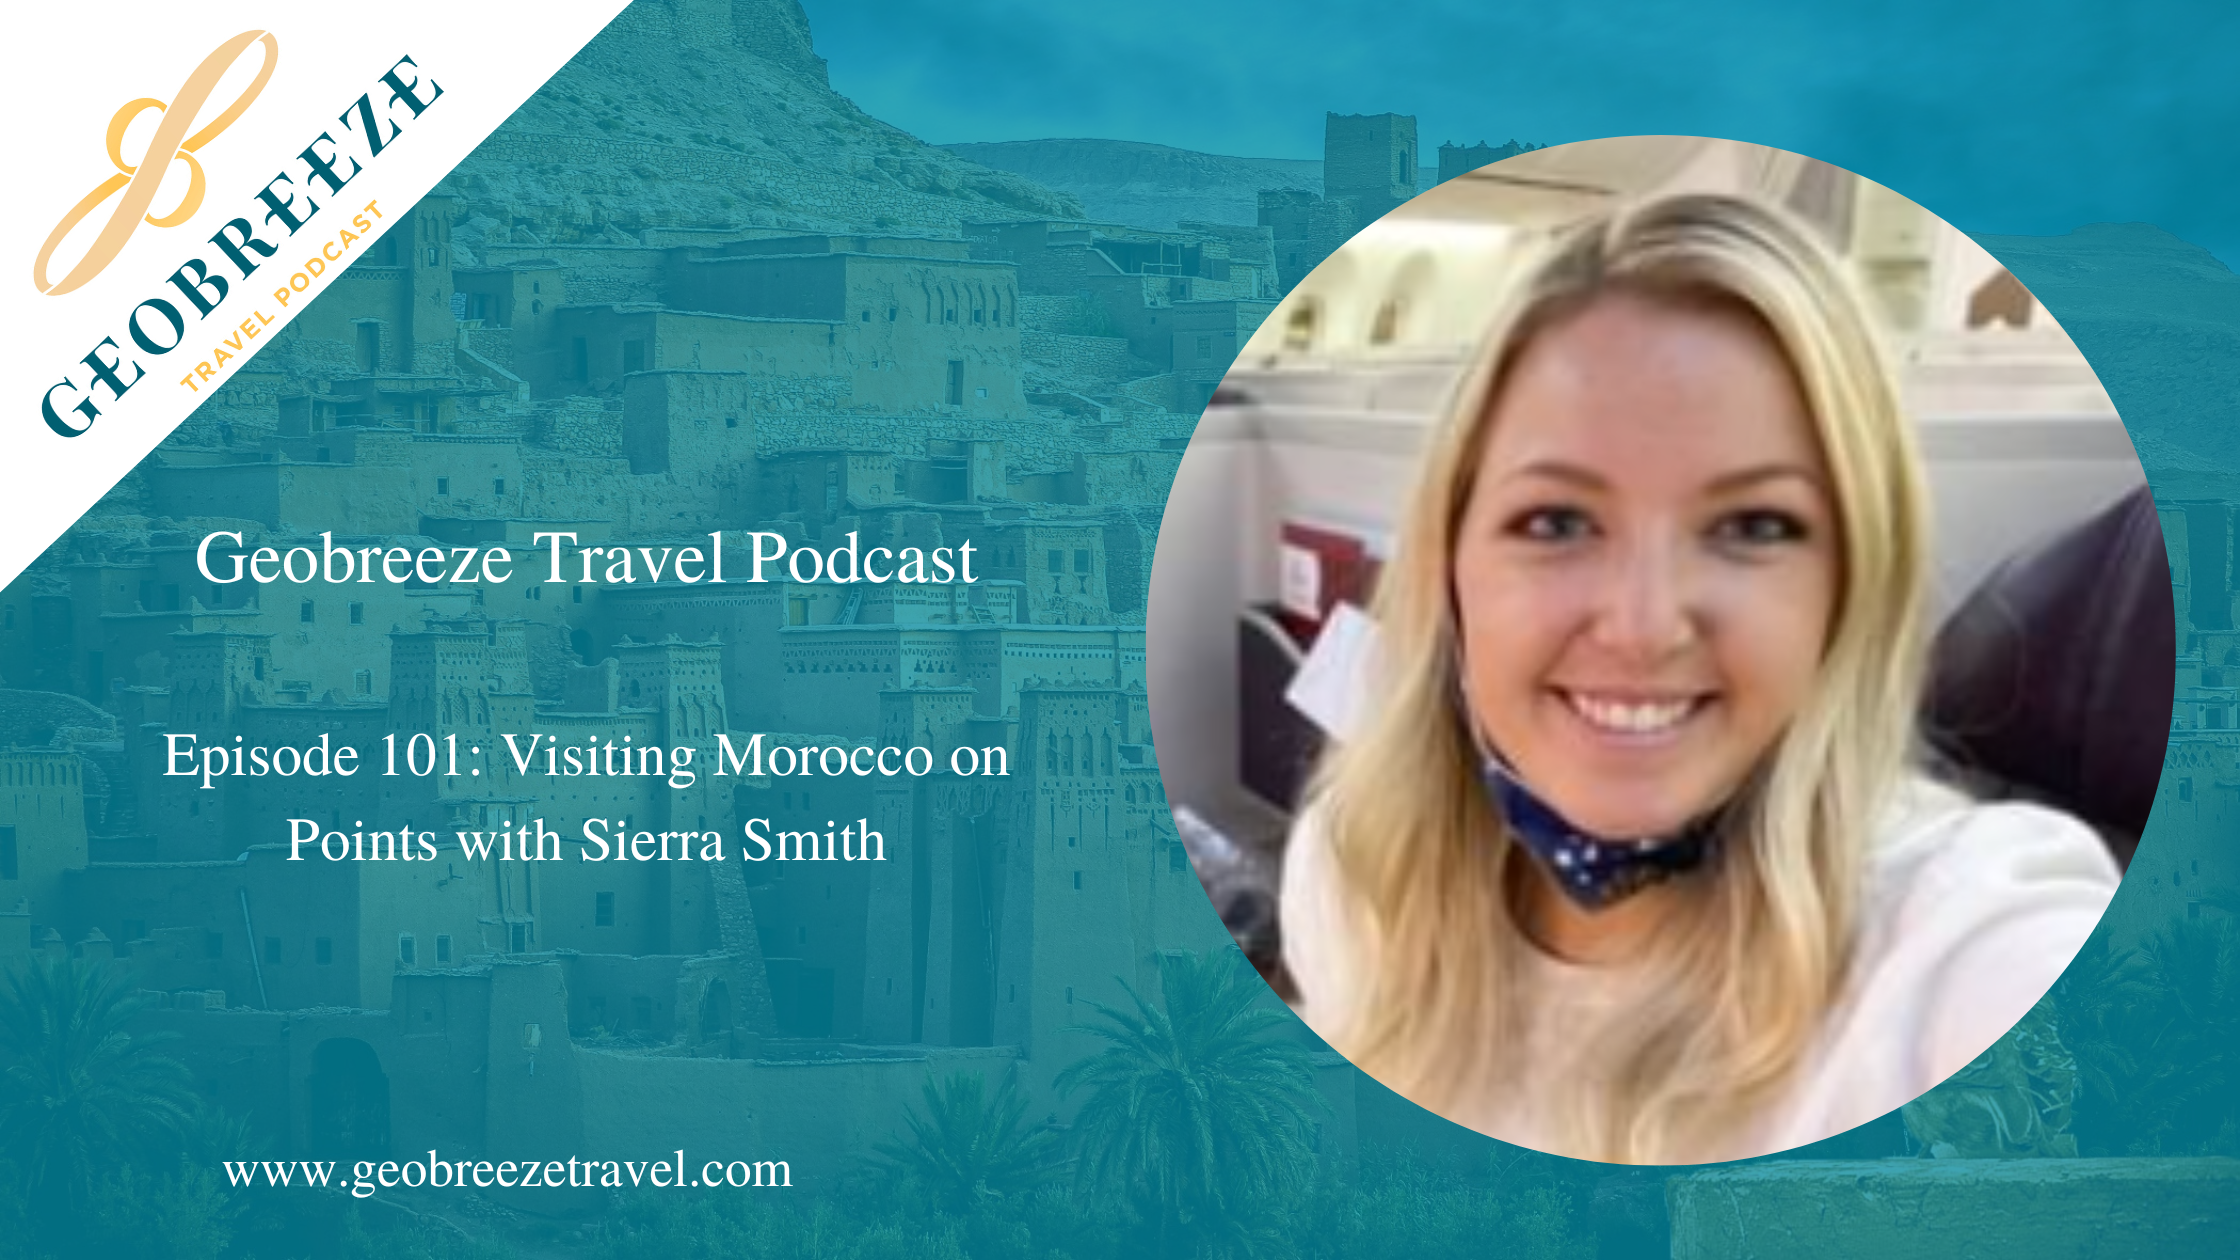 Episode 101: Visiting Morocco on Points with Sierra Smith